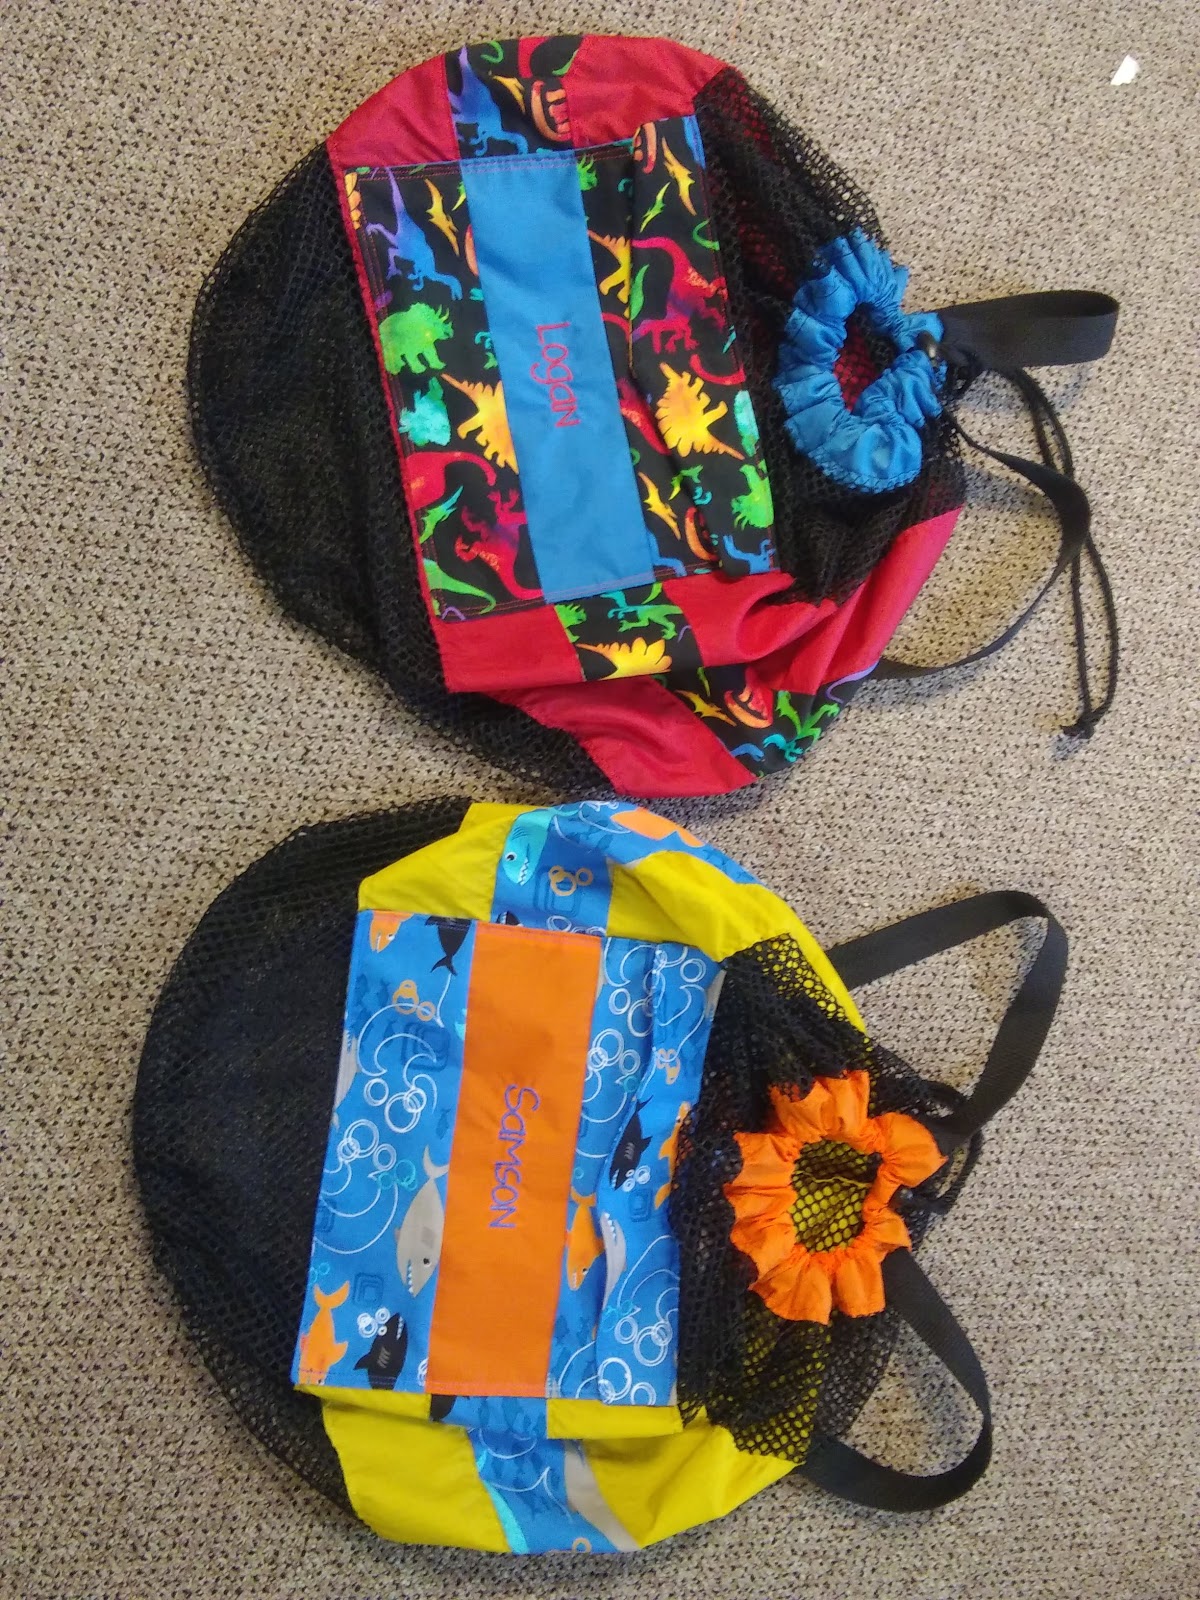 Tutorial - DIY Kid's Backpack - Great for Pool, Toys, Overnight Outings ...